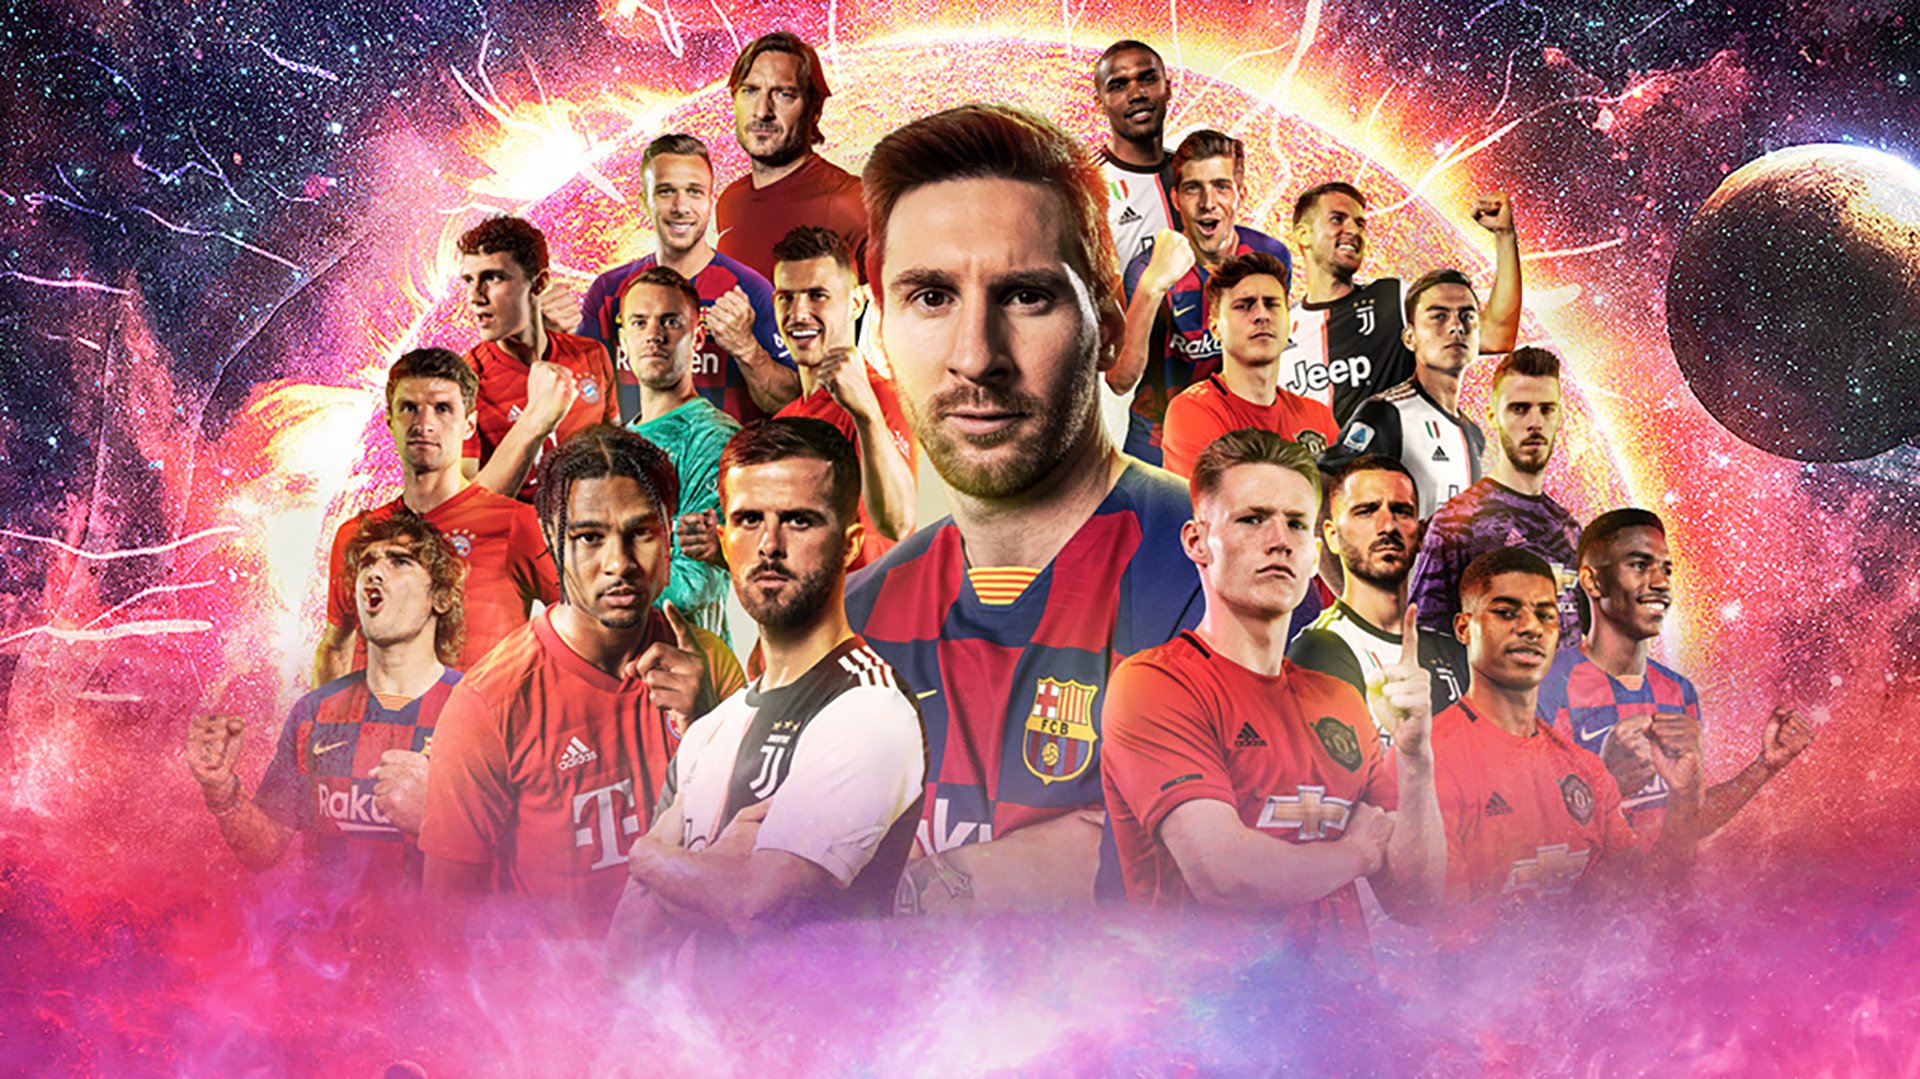 PES 2020 Mobile: Discover Legendary Players